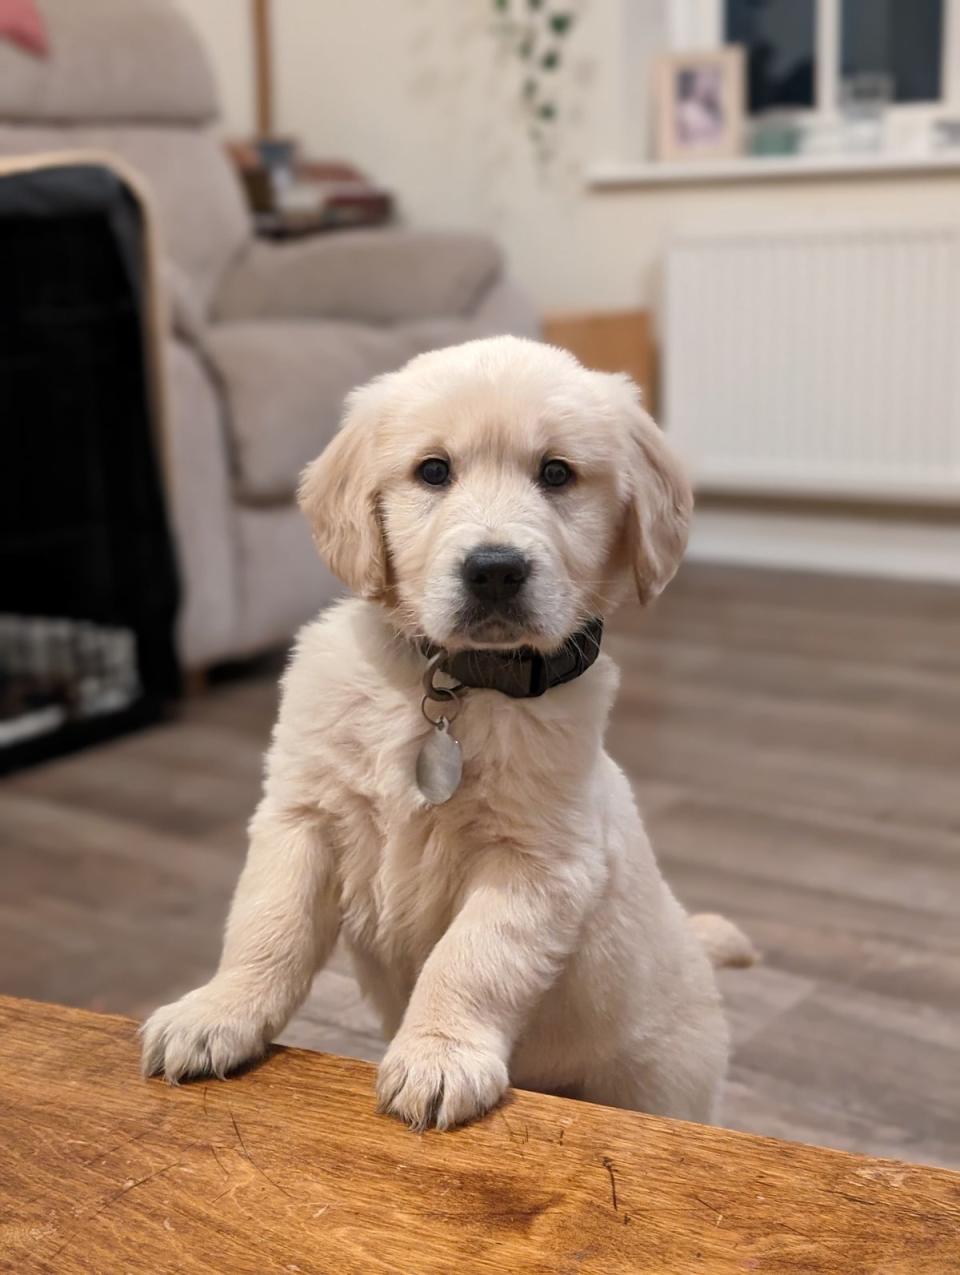 Albus the golden retriever puppy is the latest addition to the family (Handout)